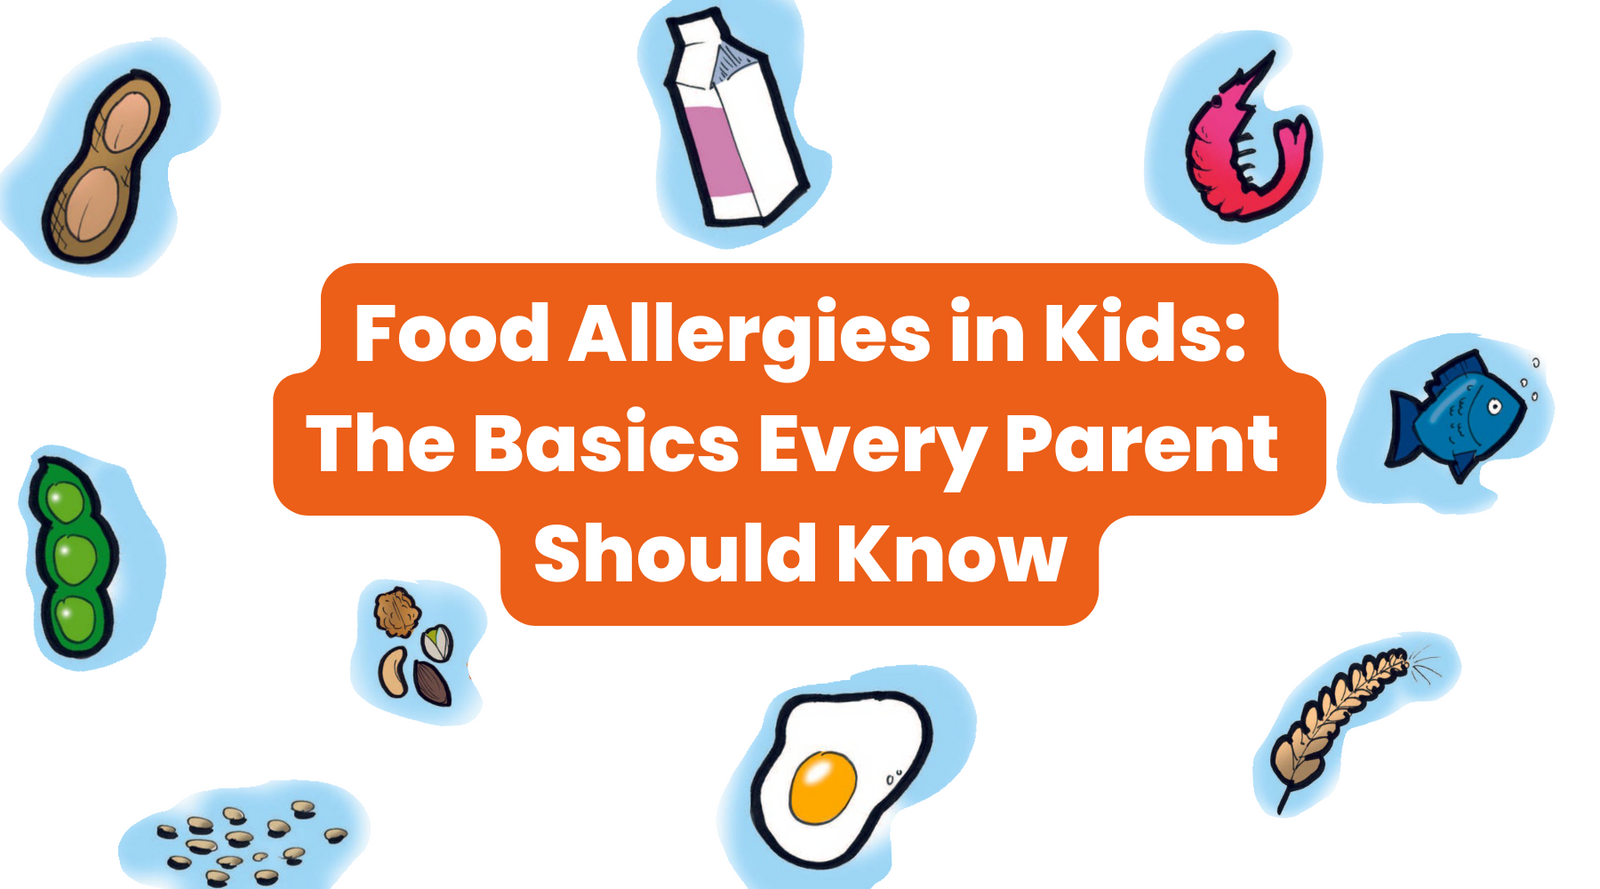 Food Allergies in Kids: The Basics Every Parent Should Know